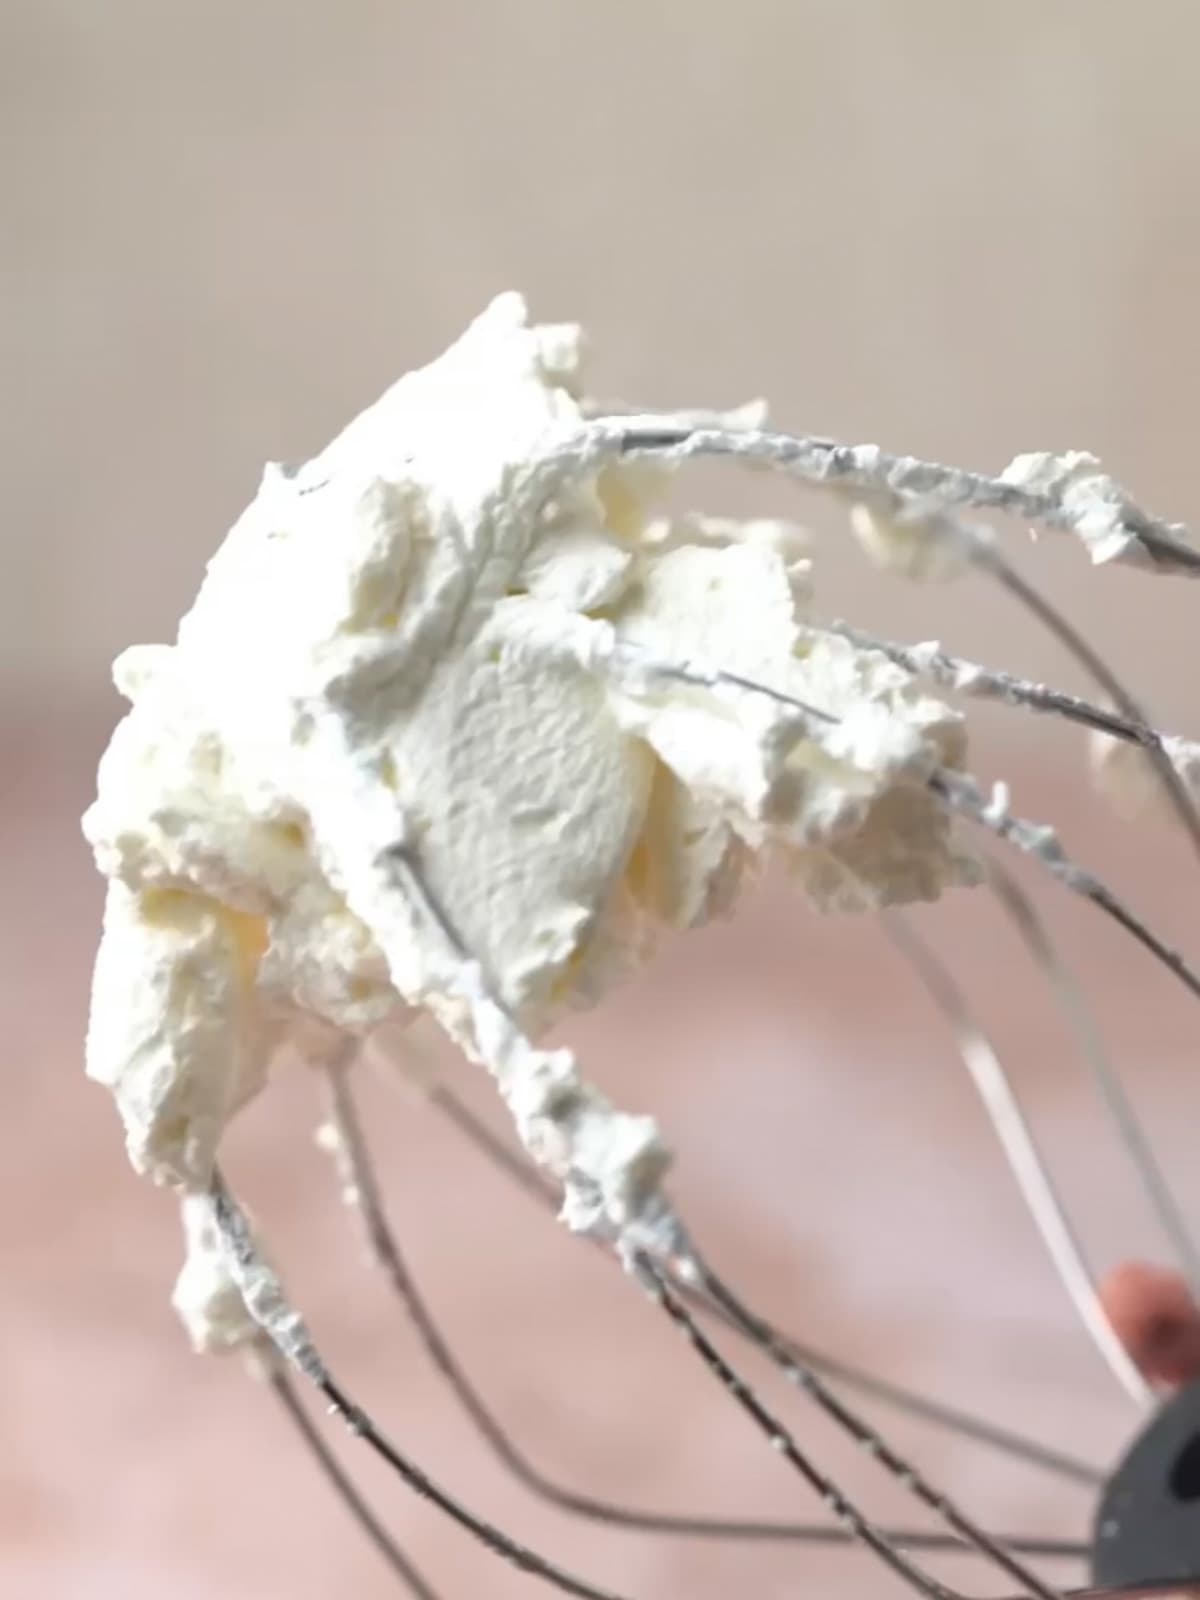 whipped heavy cream on a beater